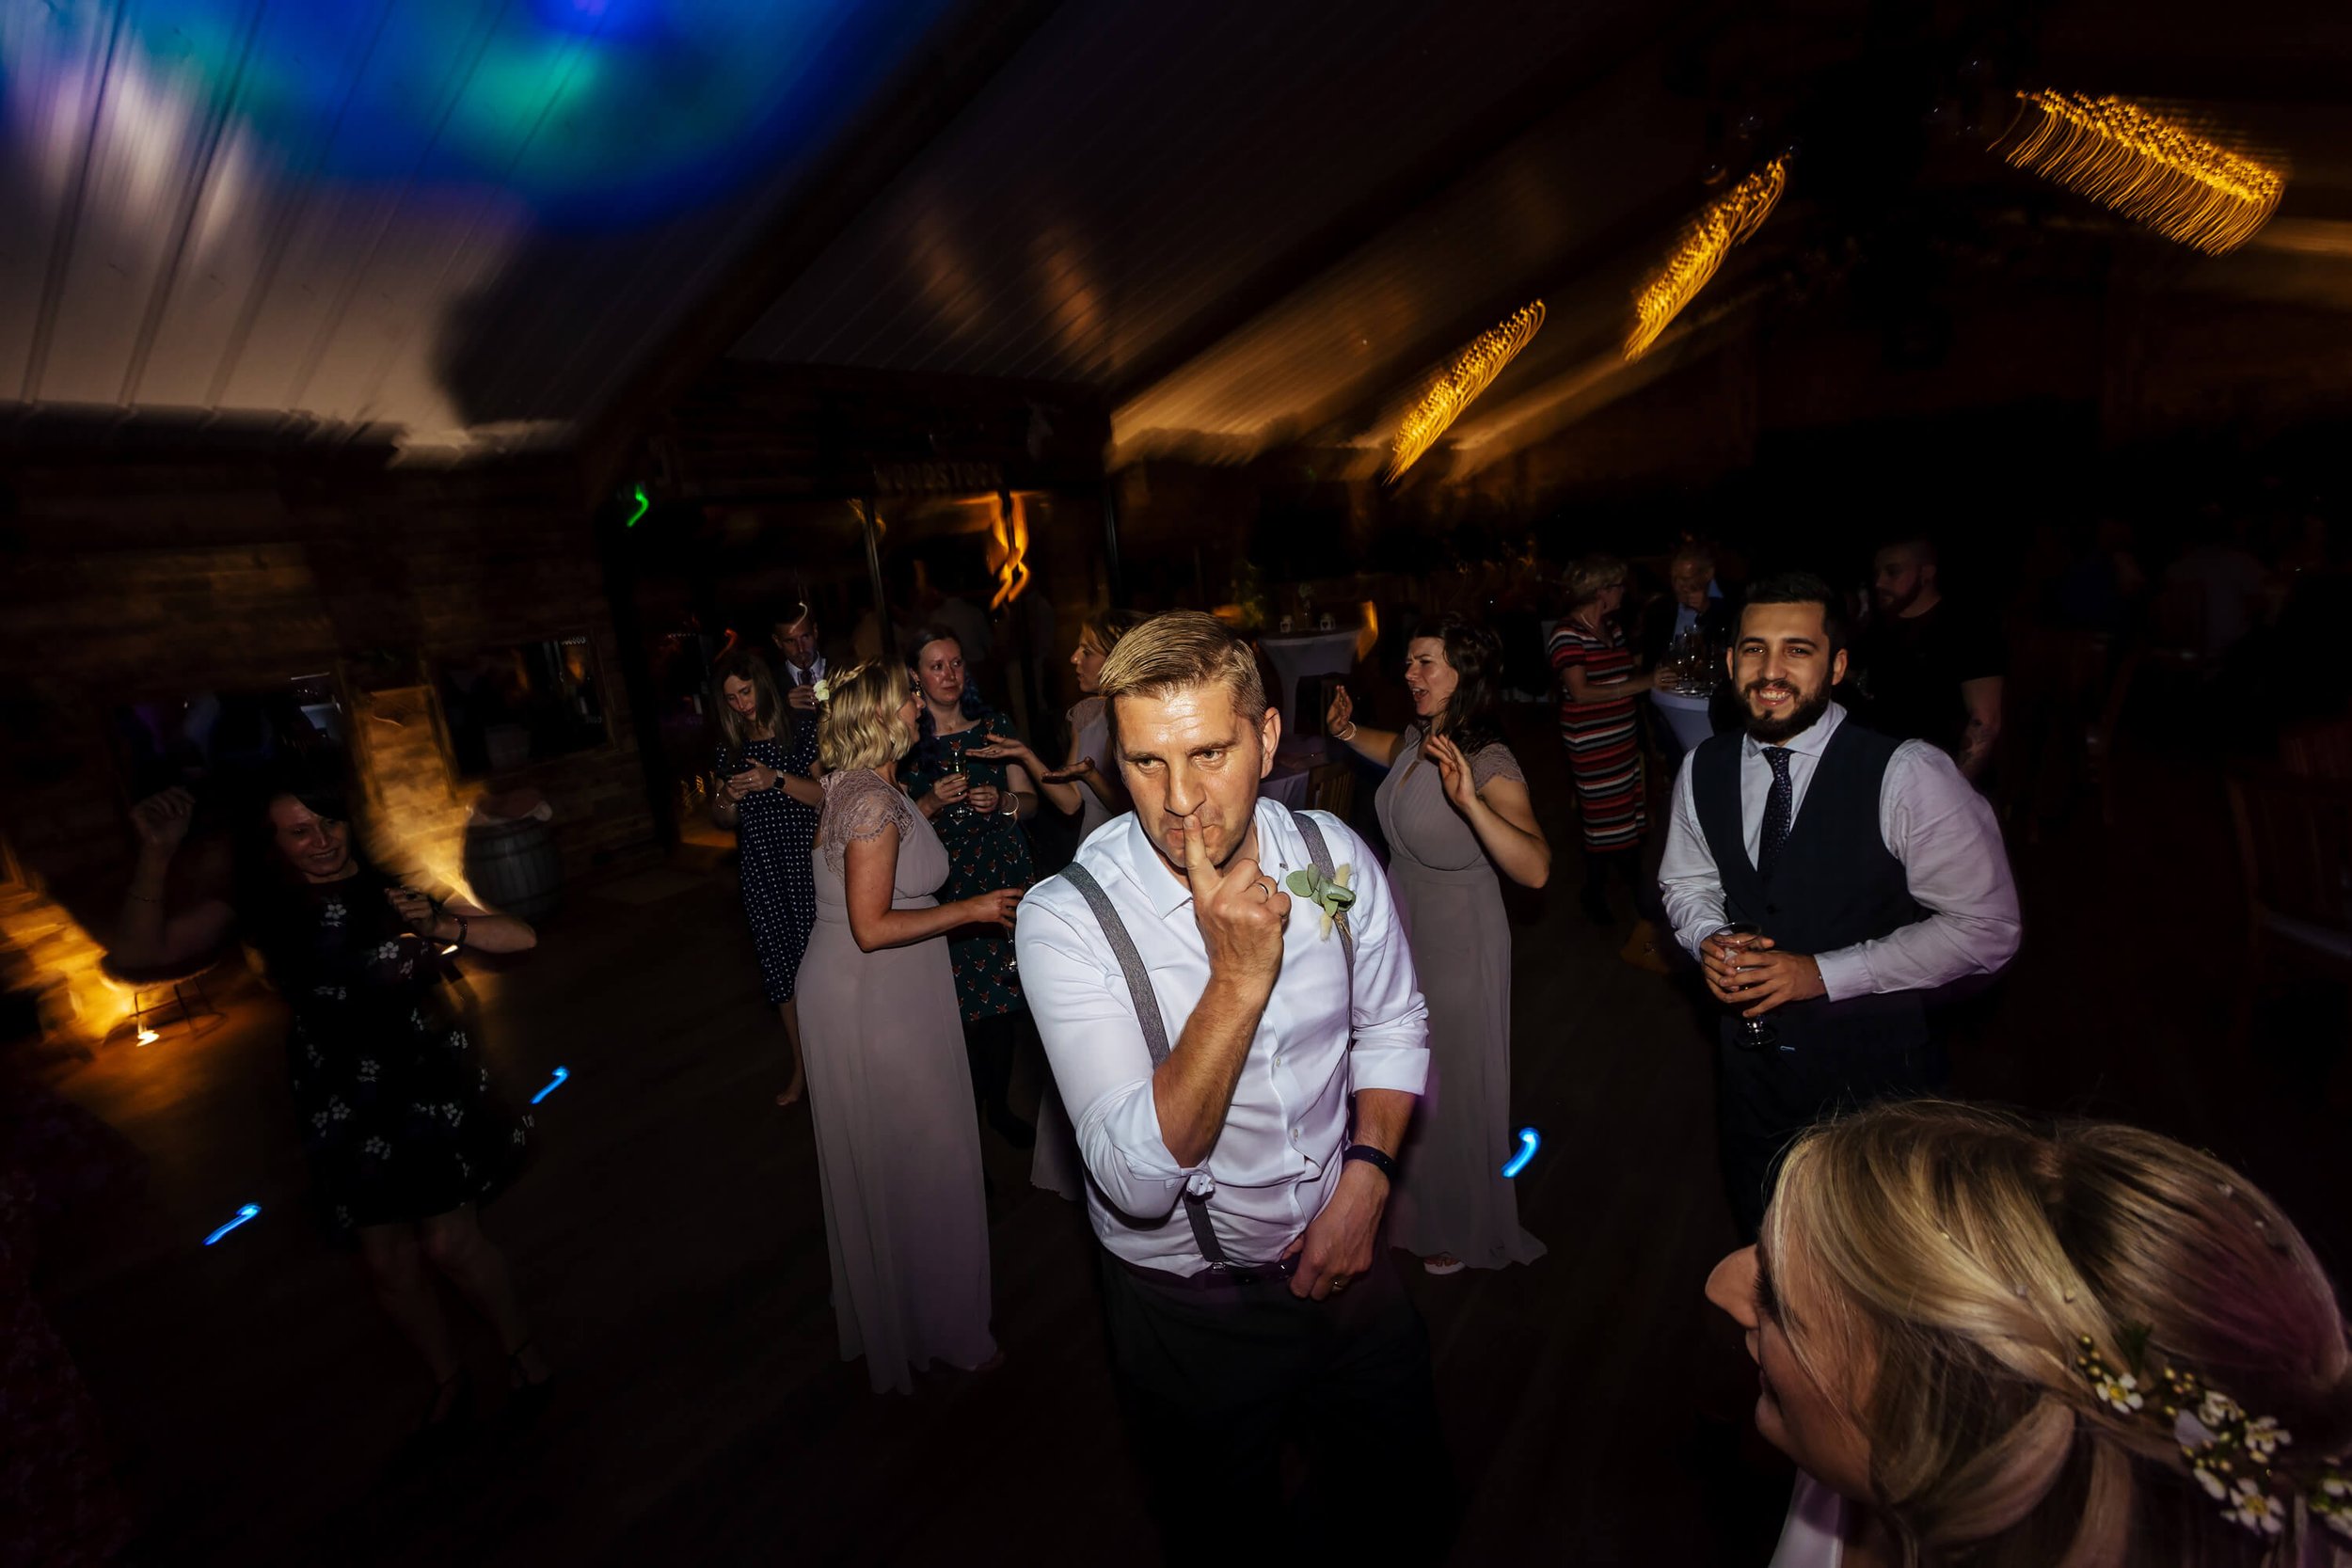 Fun and games on the dance floor